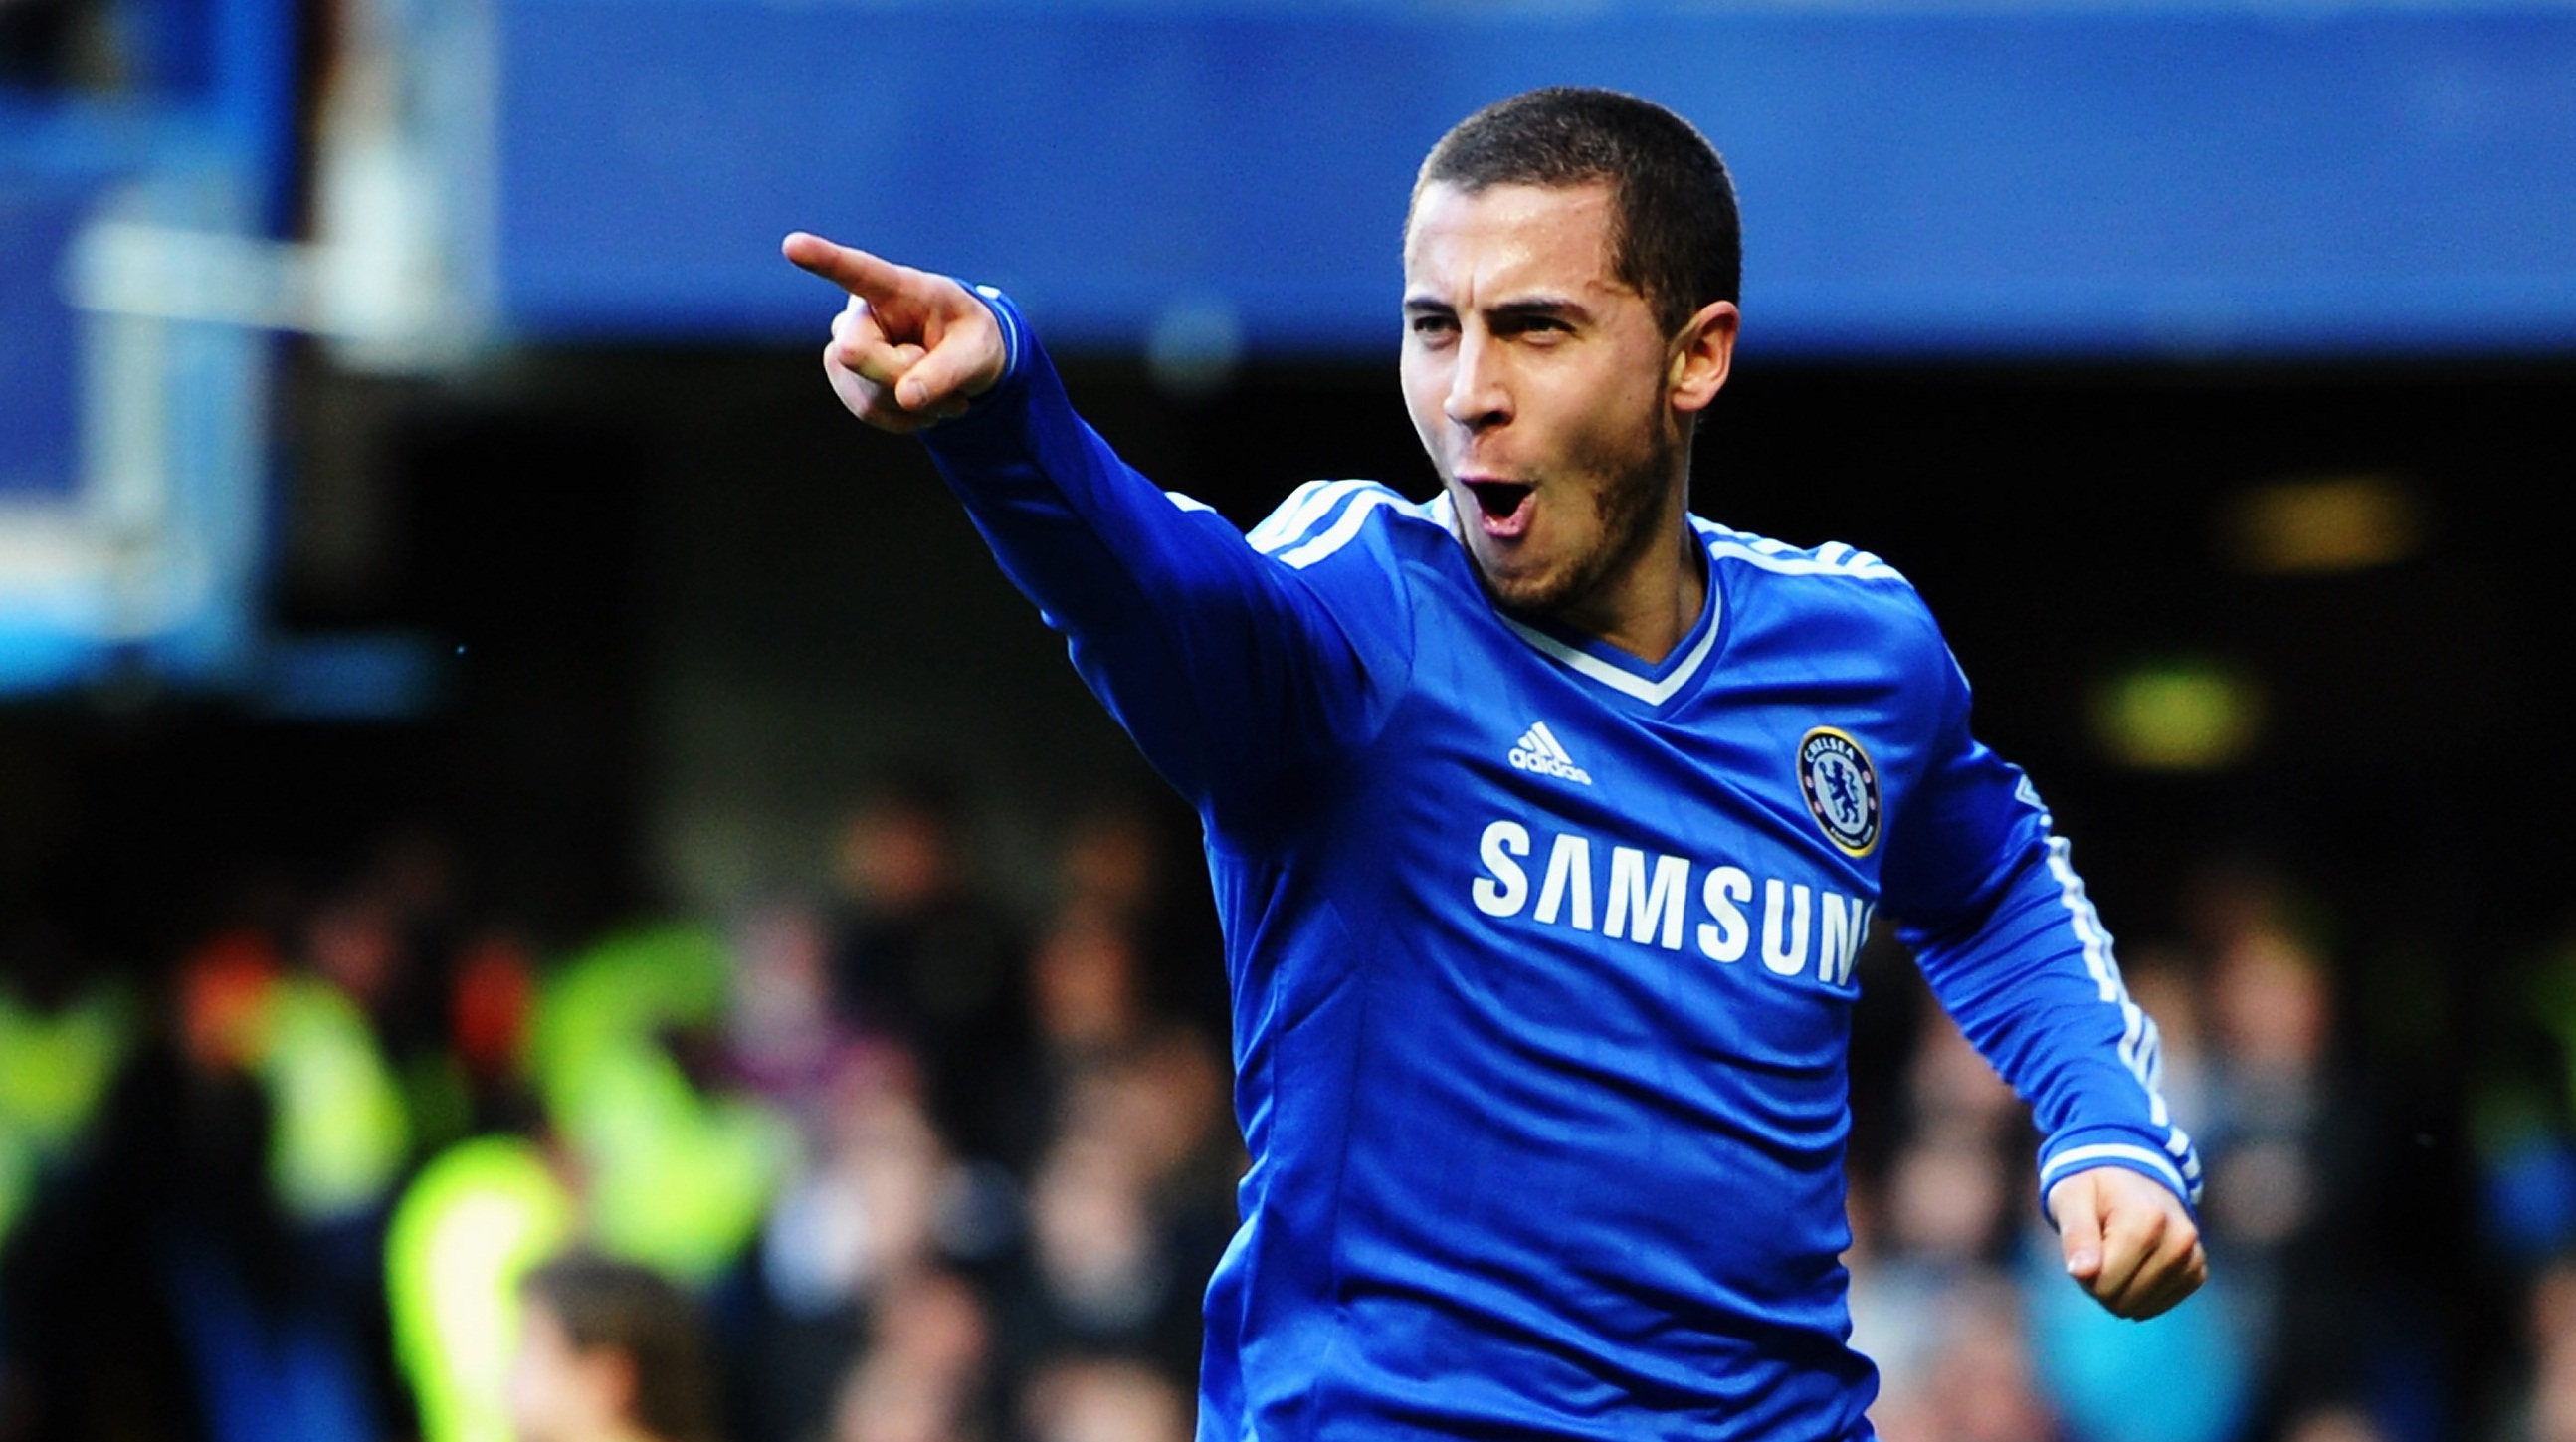 LONDON, ENGLAND - FEBRUARY 08: Eden Hazard of Chelsea celebrates scoring during the Barclays Premier League match between Cheslea and Newcastle United at Stamford Bridge on February 8, 2014 in London, England. (Photo by Mike Hewitt/Getty Images)